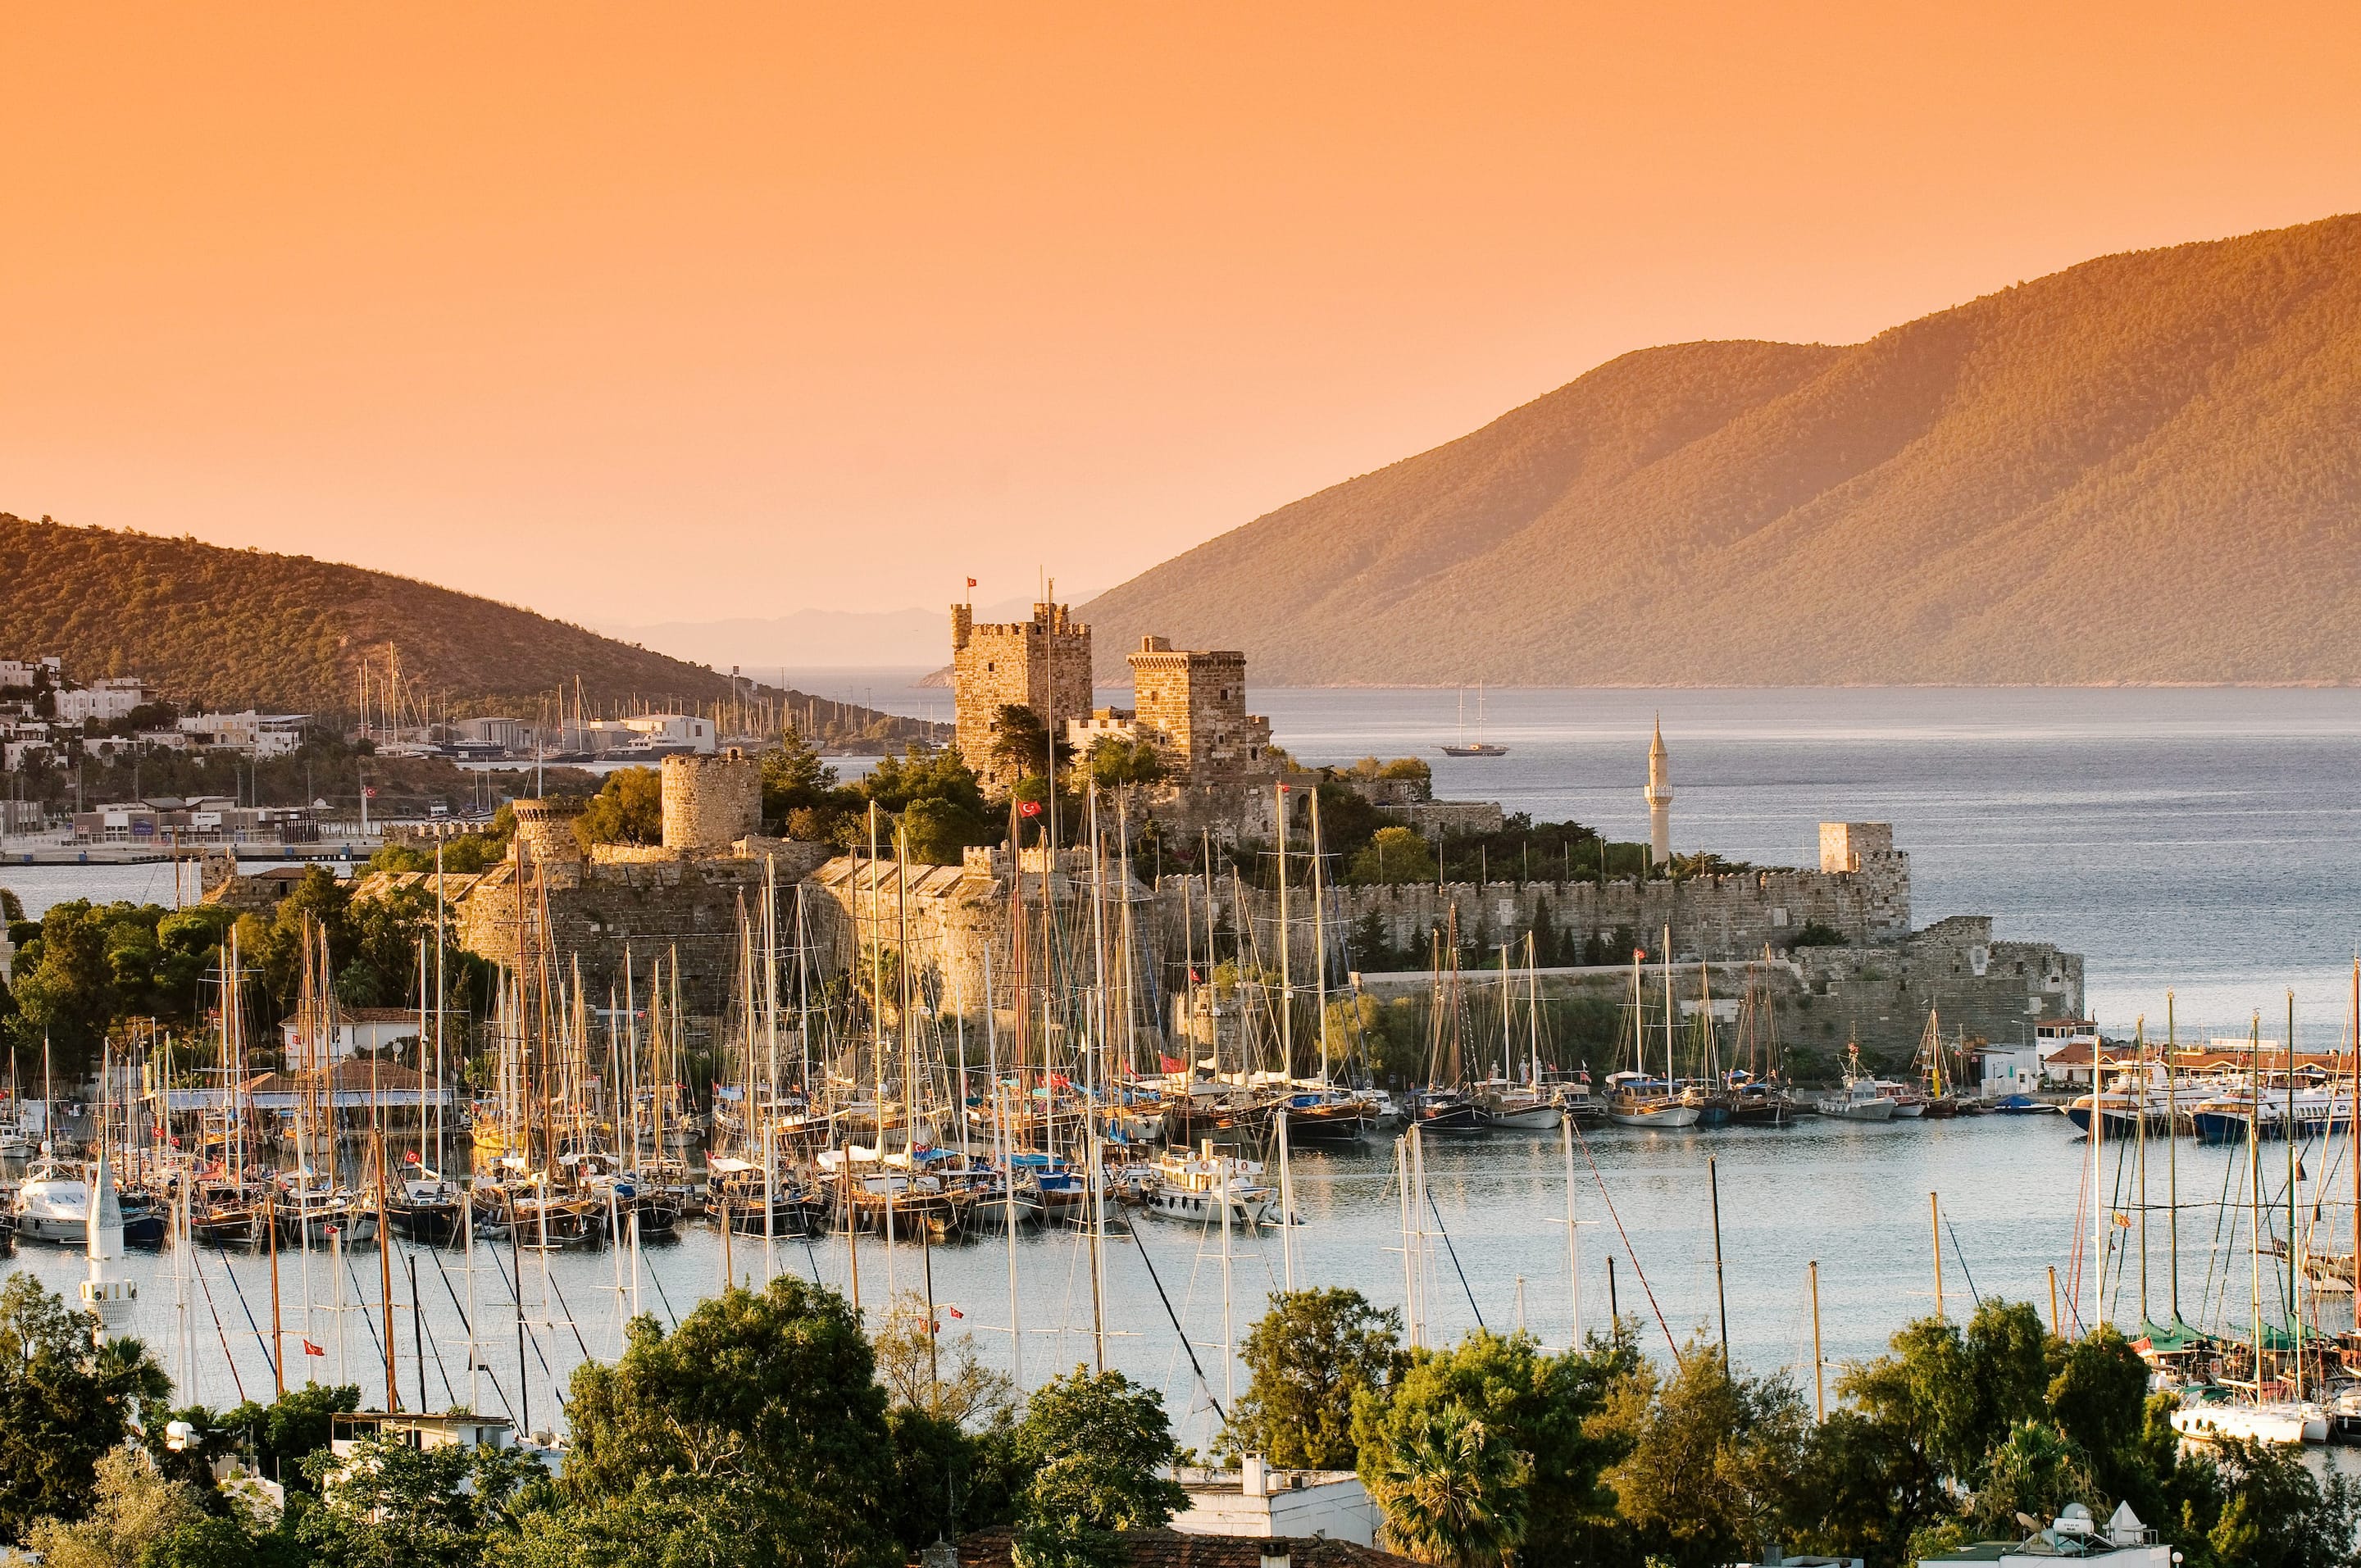 Magnificent Bodrum Castle surrounded by boats at sunset 